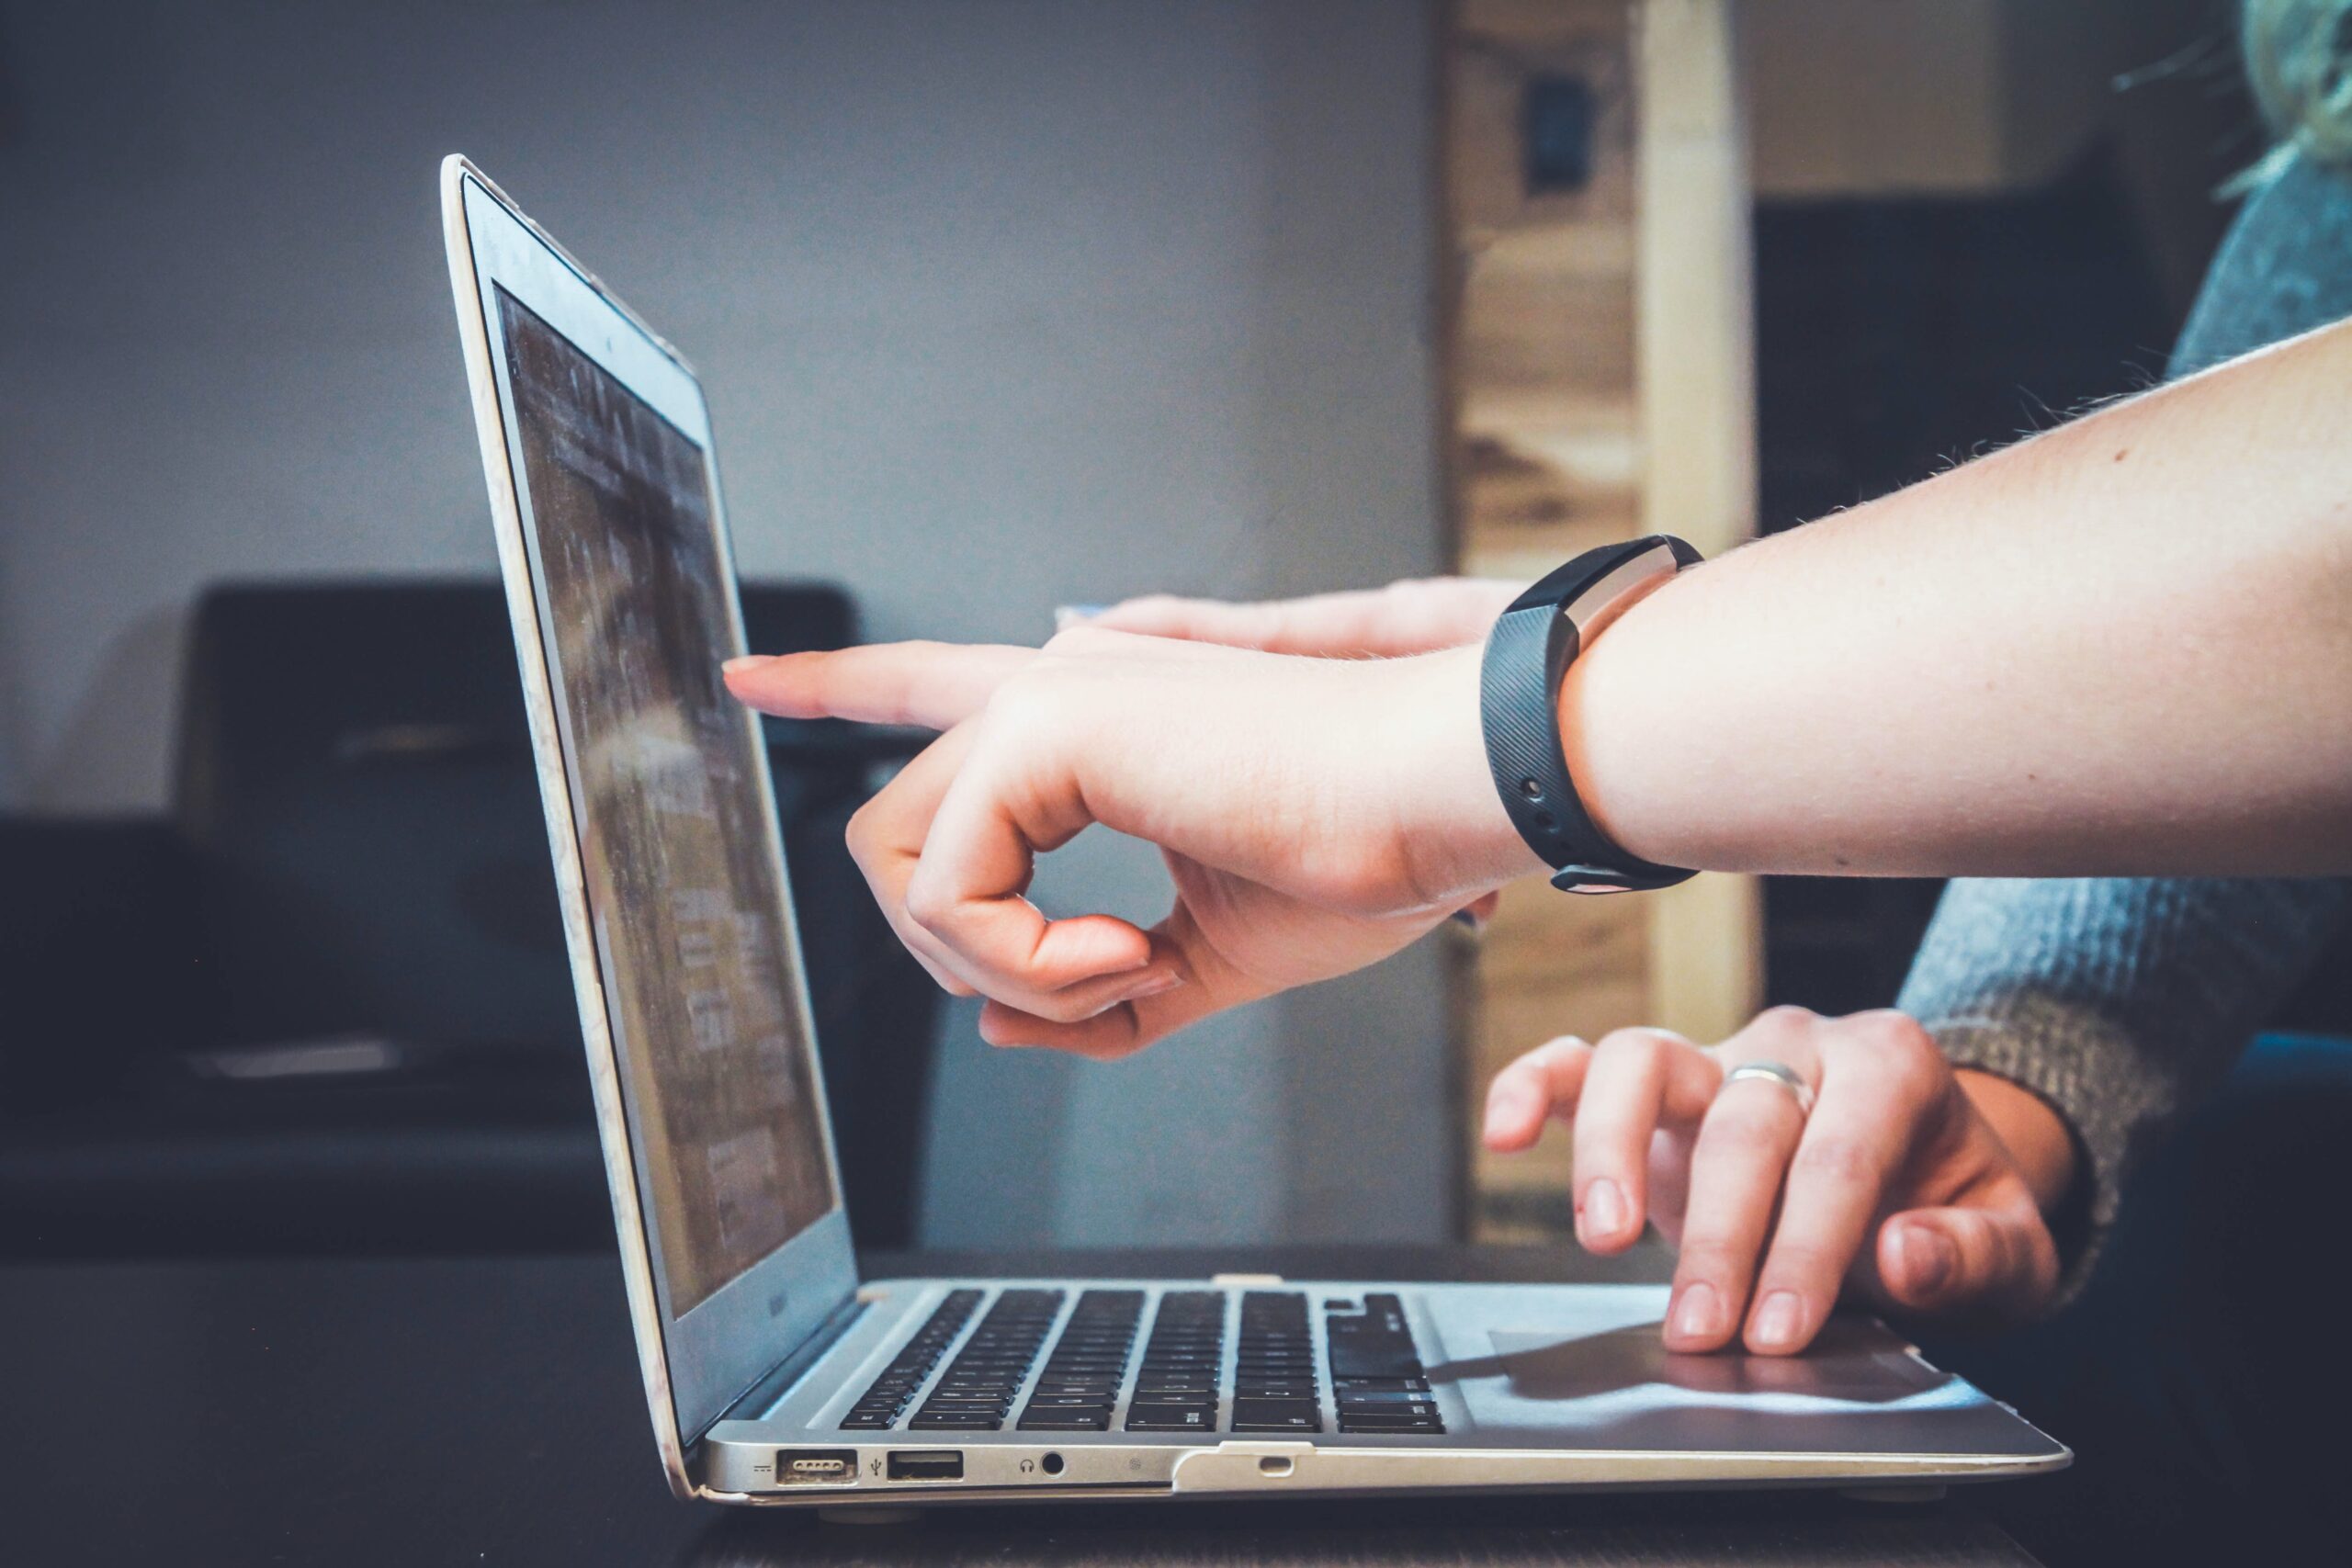 A man wearing a black wristband is pointing at a laptop screen about linked advertising that needs to be fixed and a woman wearing a silver ring on her ring finger as an ad maker agrees.